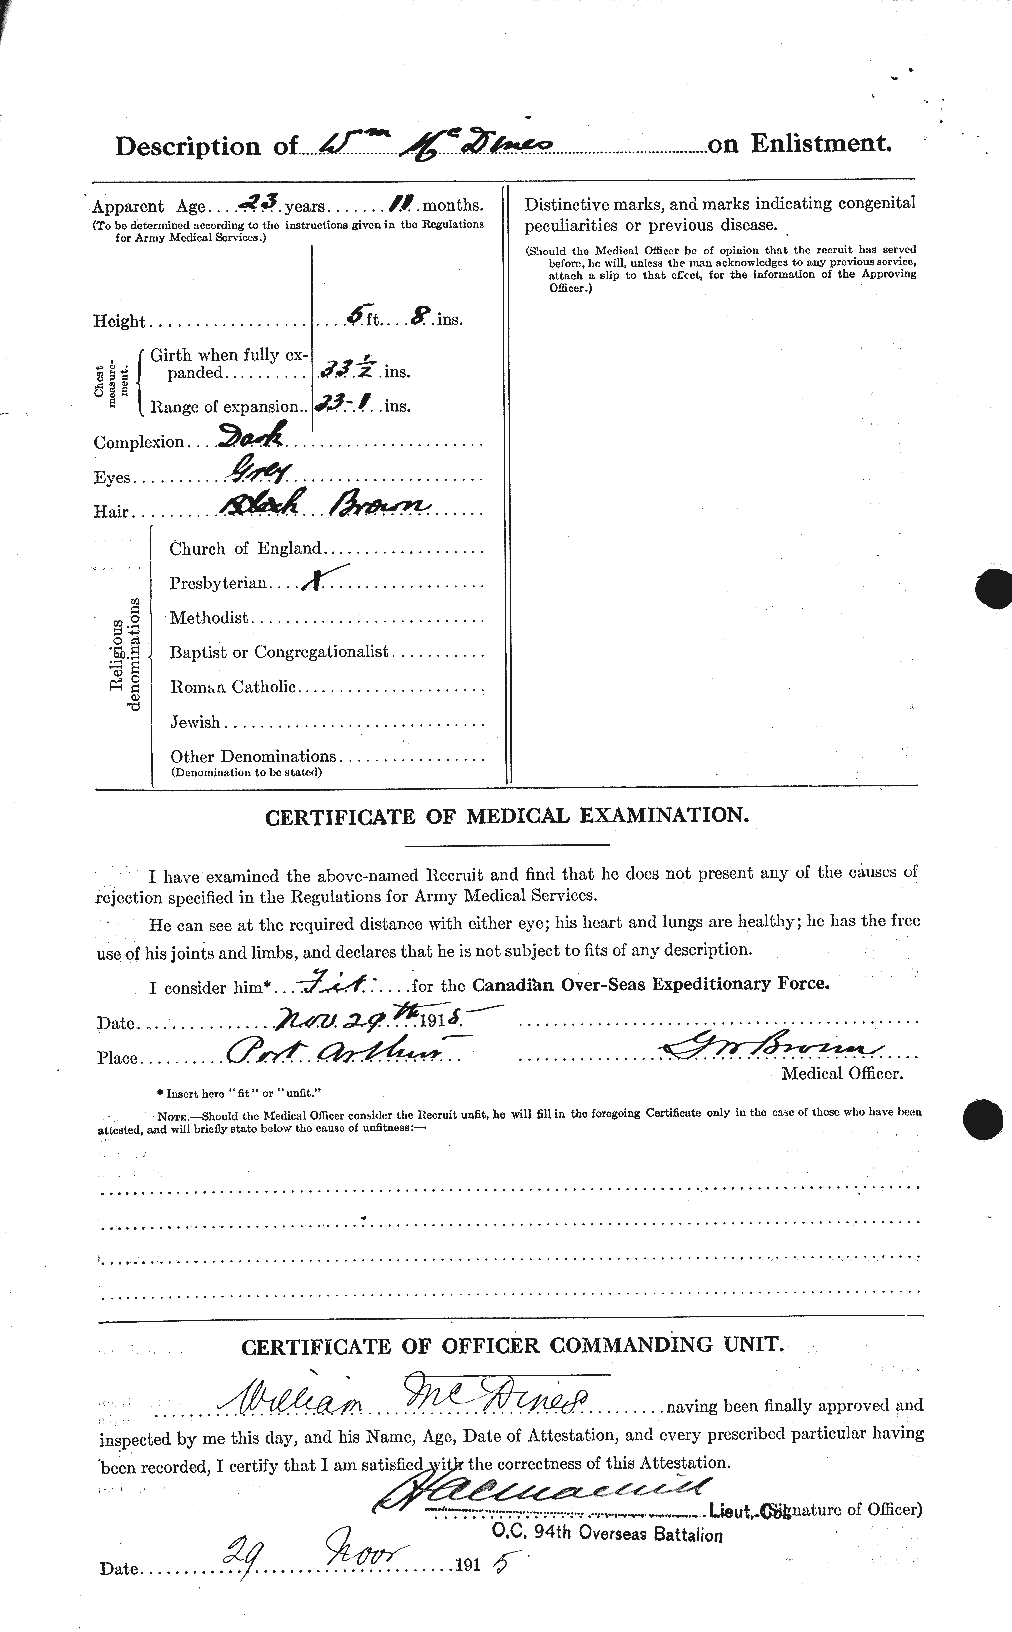 Personnel Records of the First World War - CEF 517186b